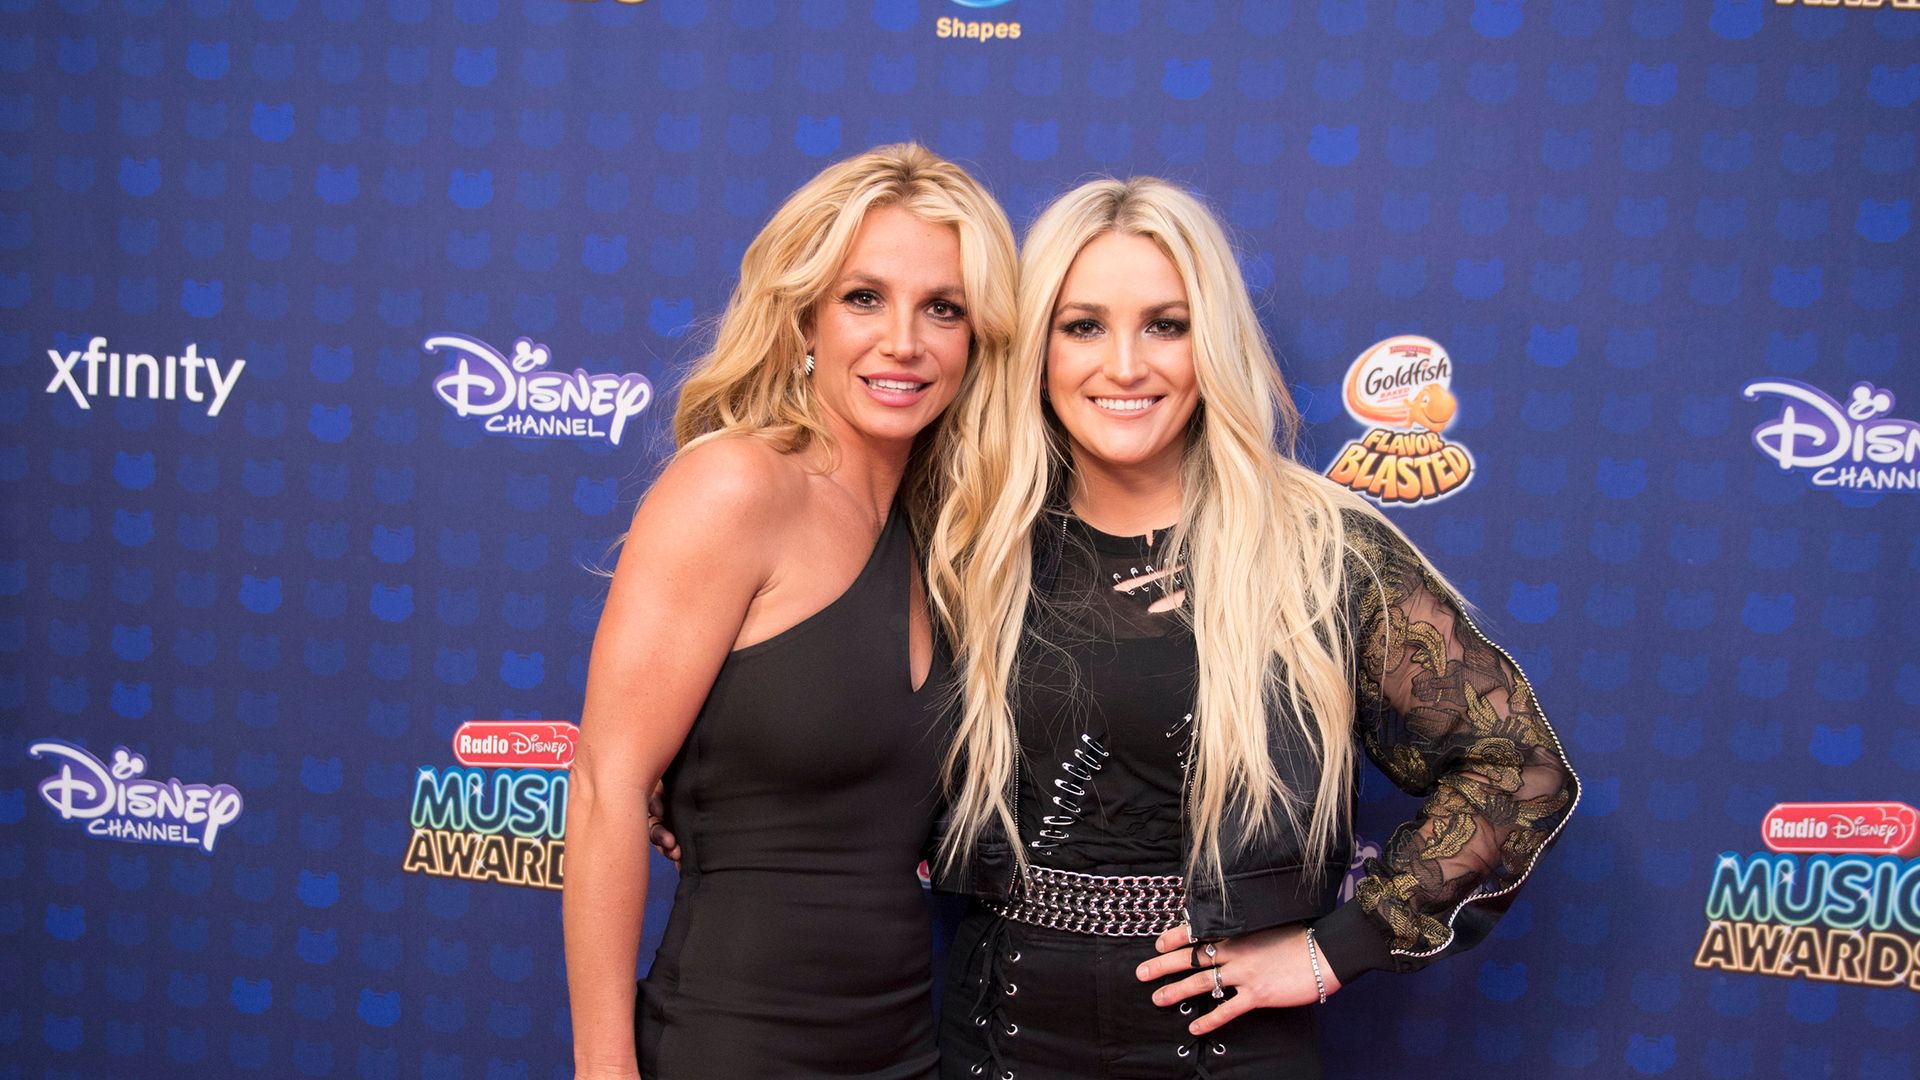 Britney and Jamie Lynn Spears at an event in 2017